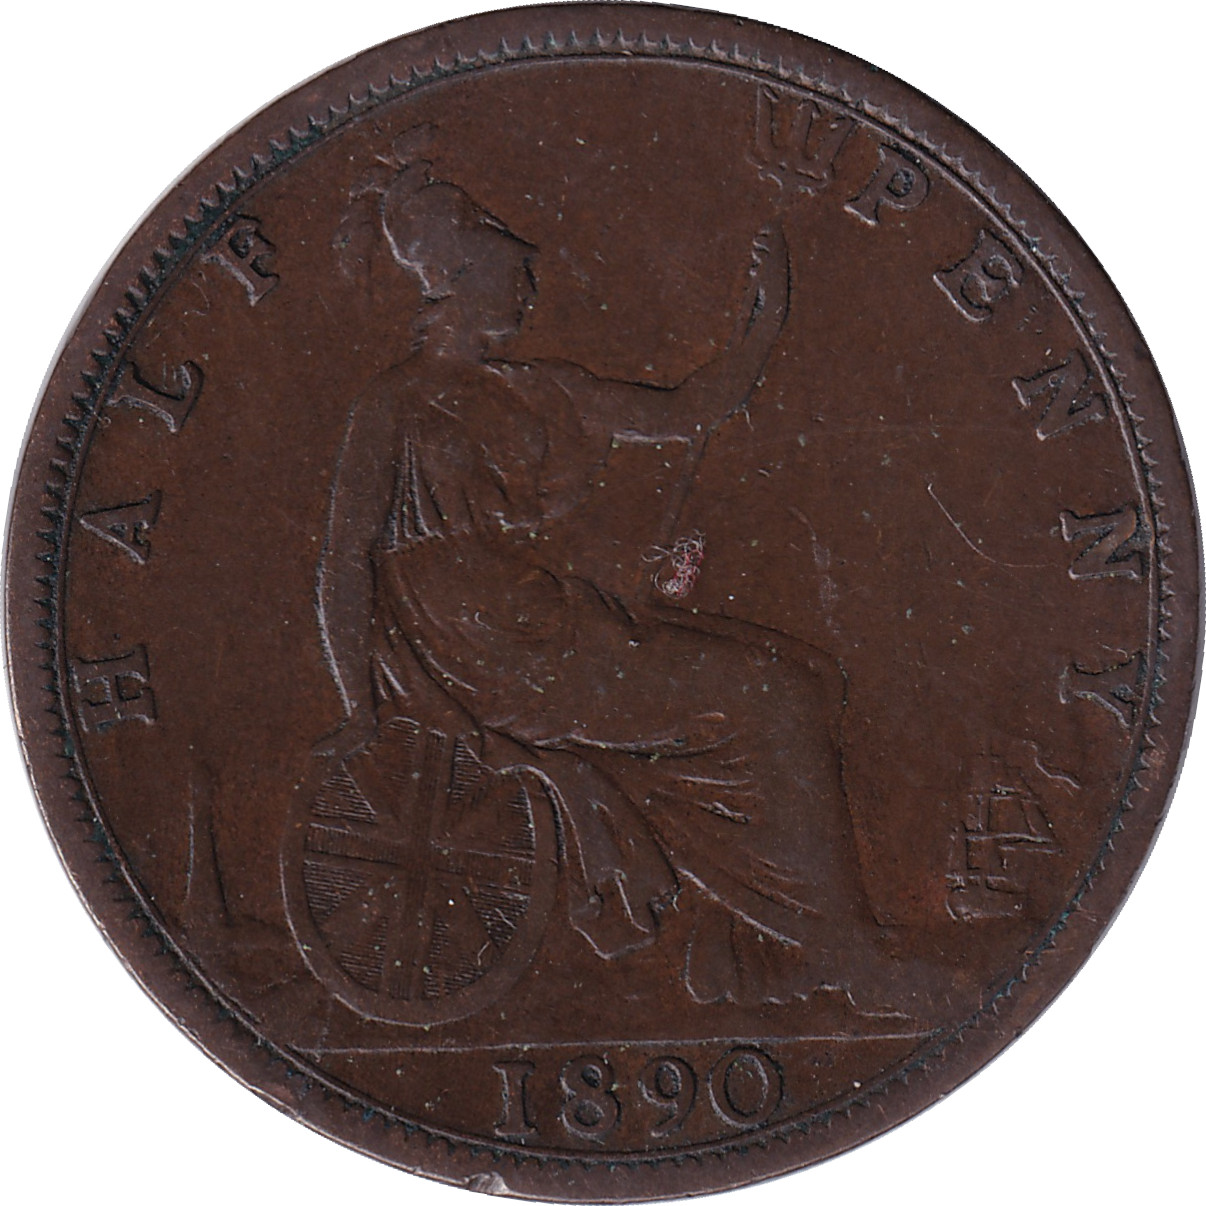 1/2 penny - Victoria - Mature bust